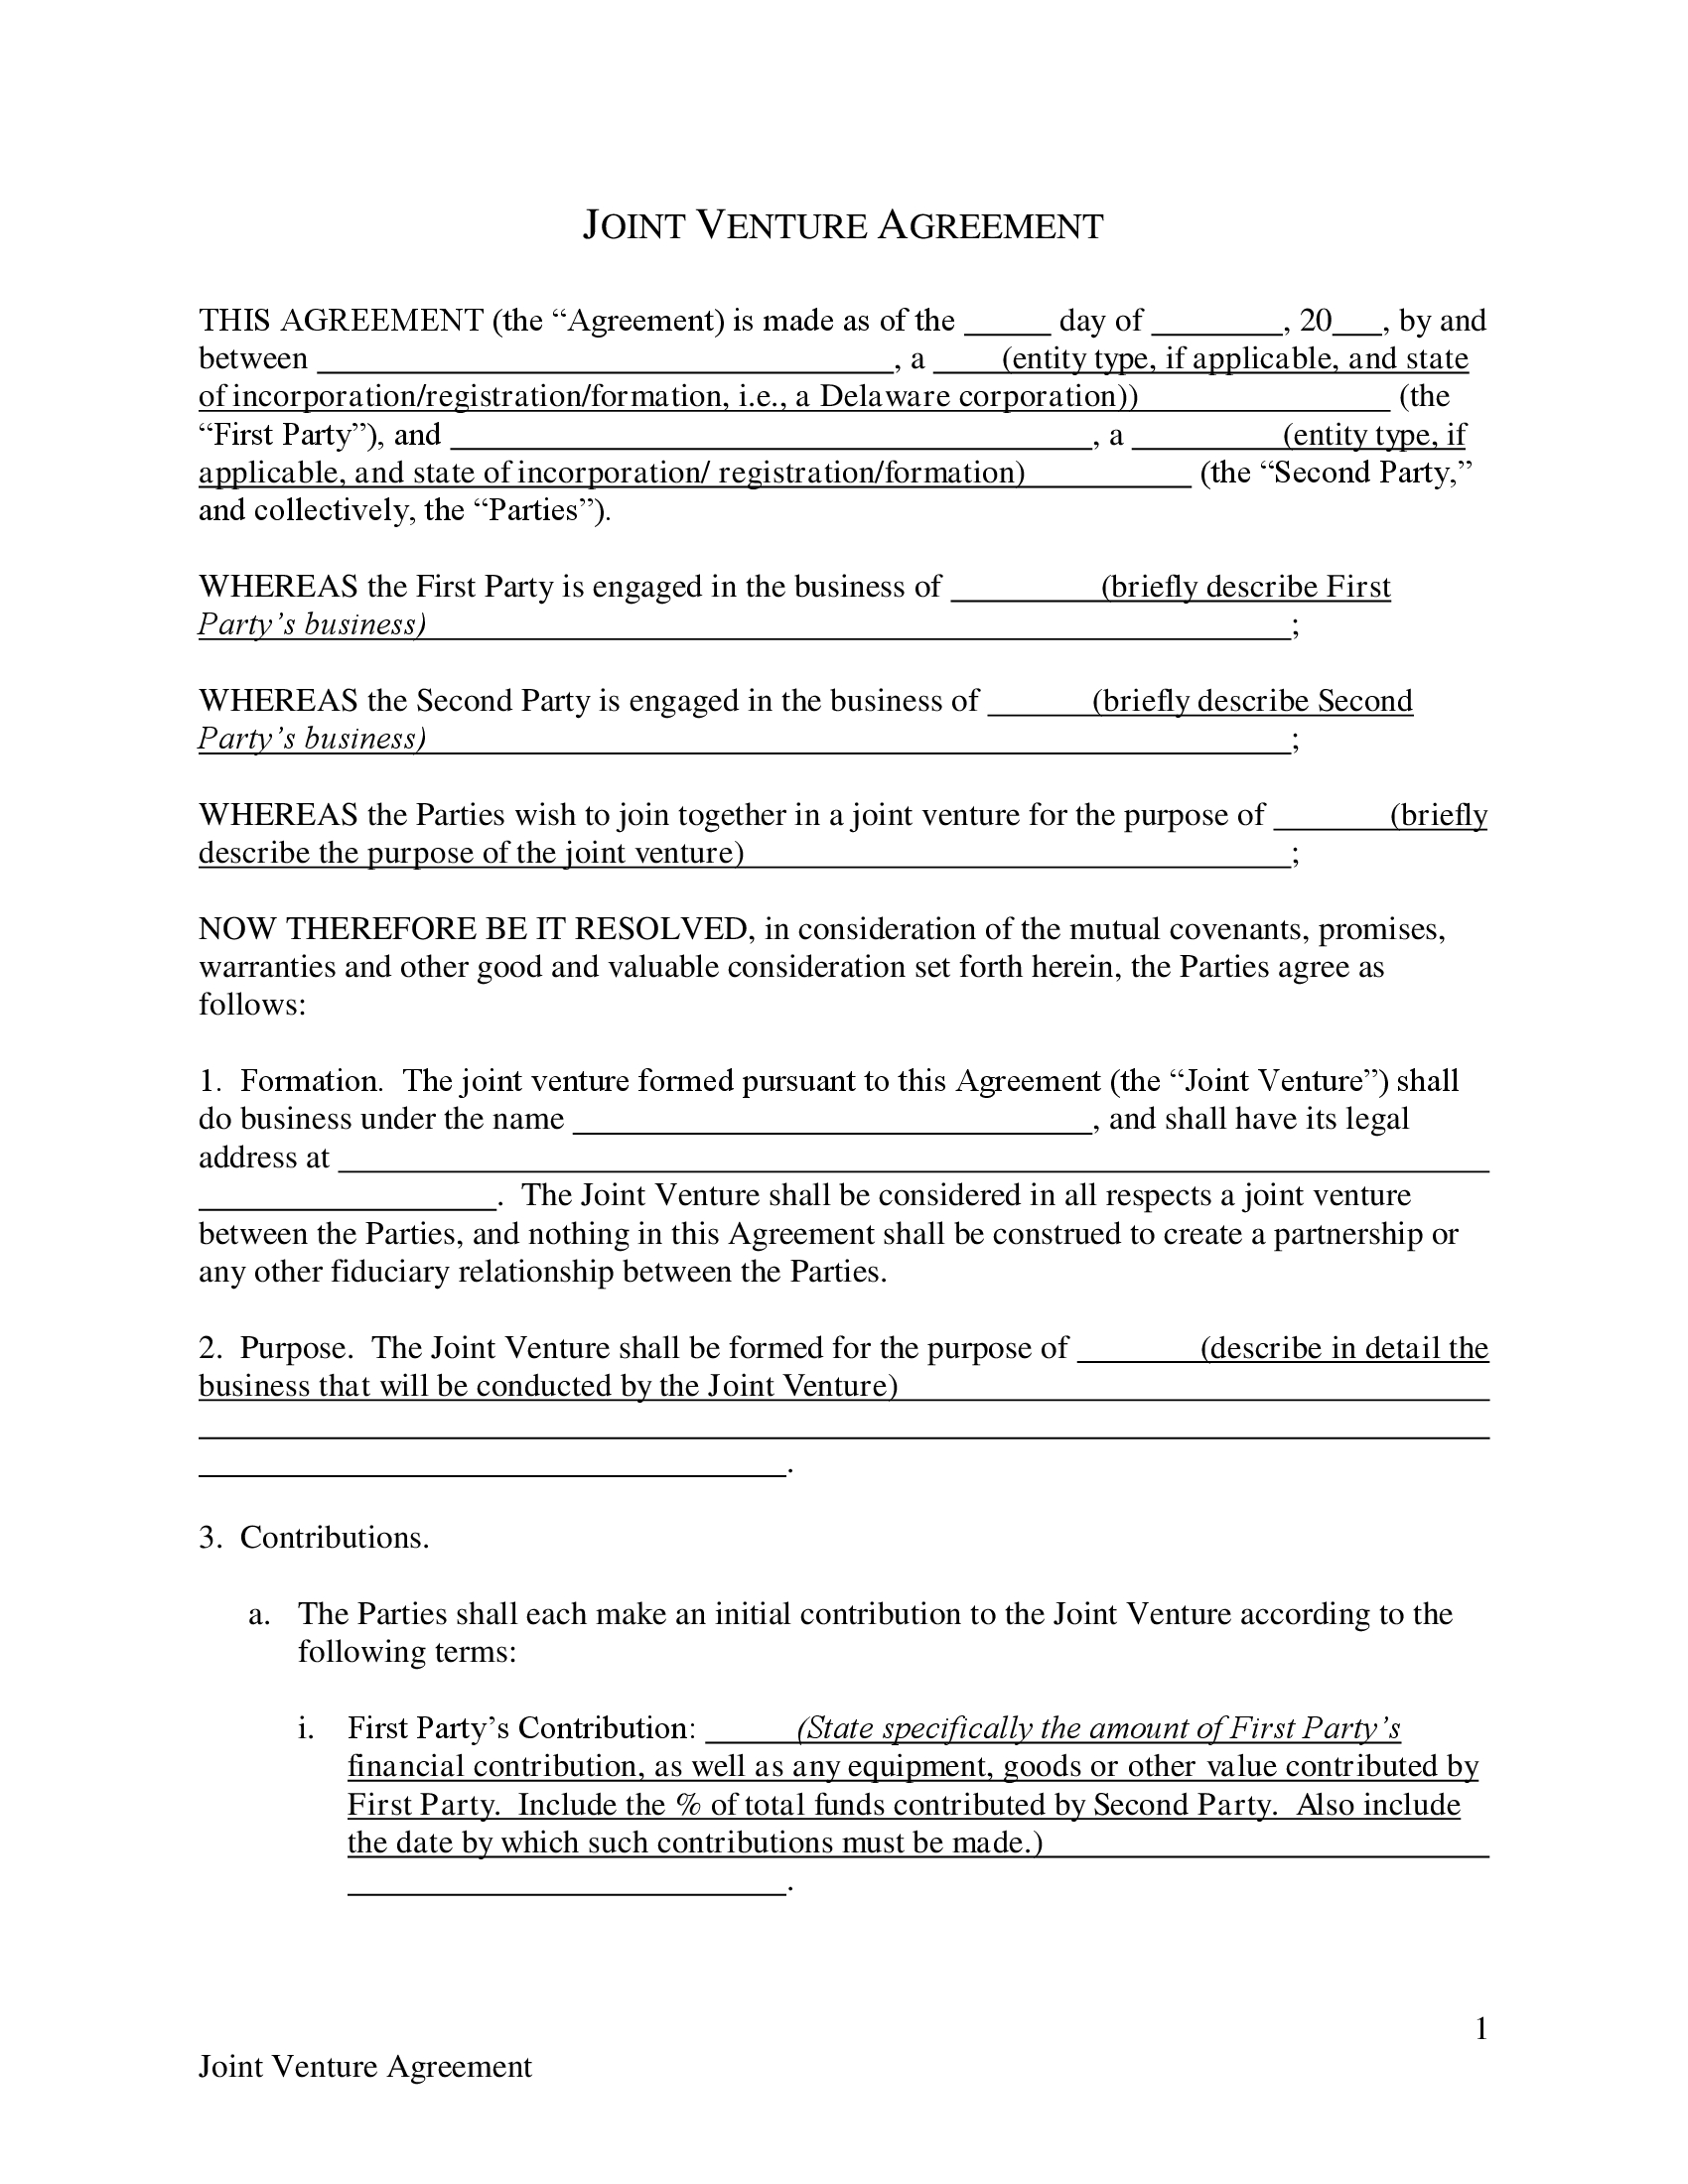 joint venture agreement form 4